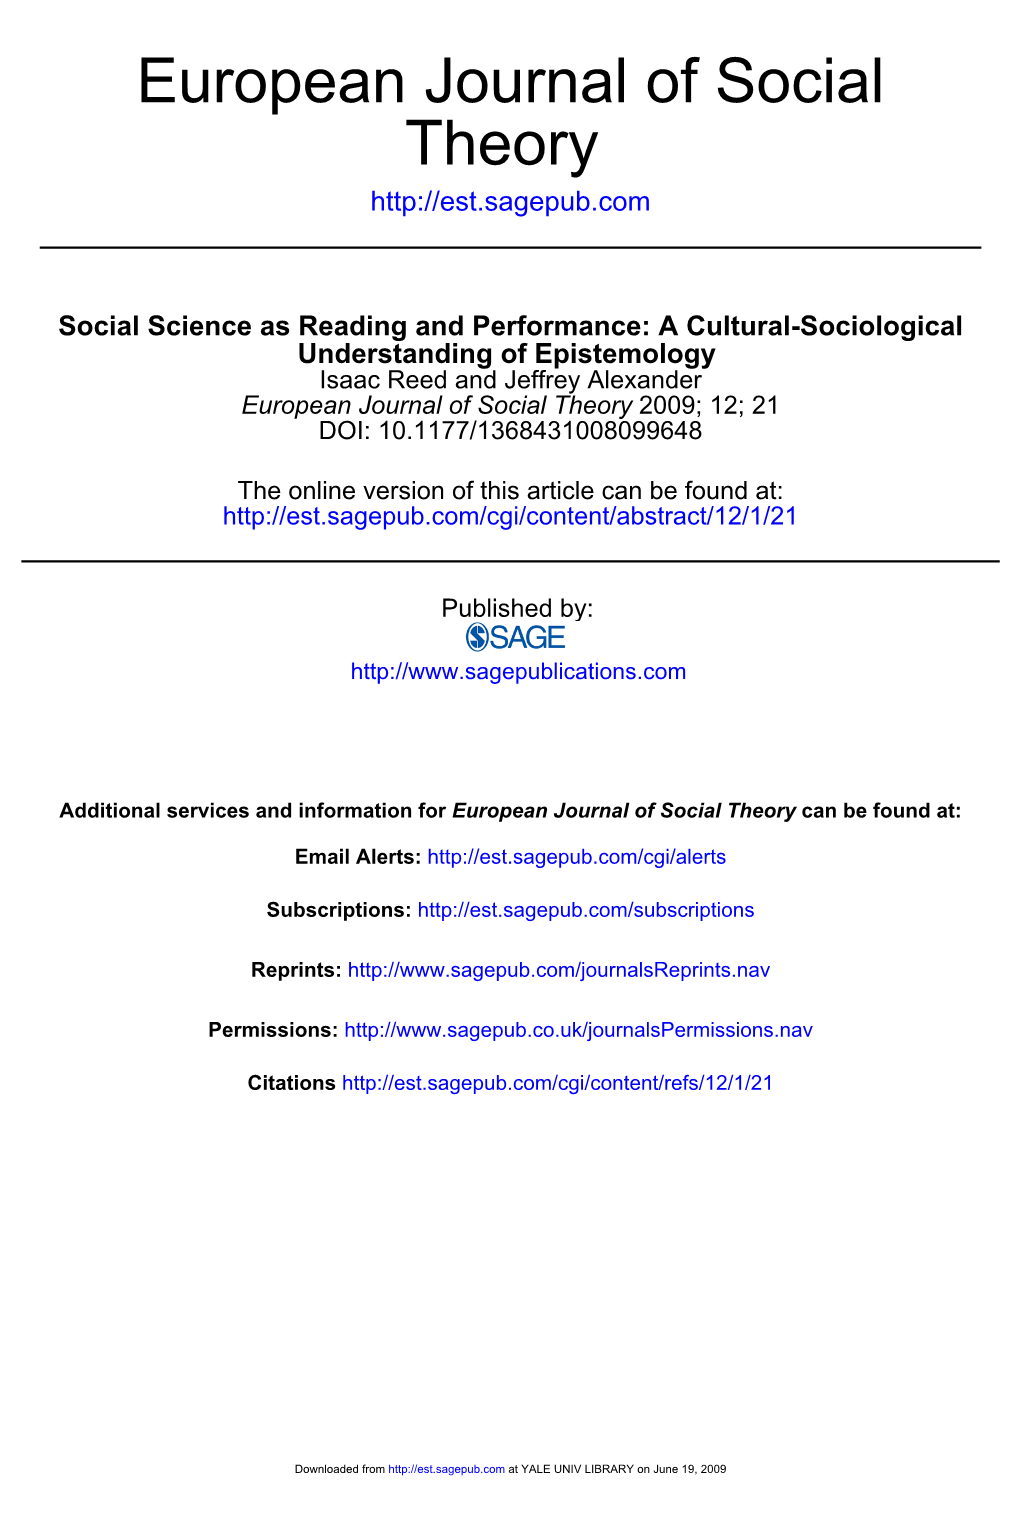 Social Science As Reading and Performance: a Cultural-Sociological Understanding of Epistemology